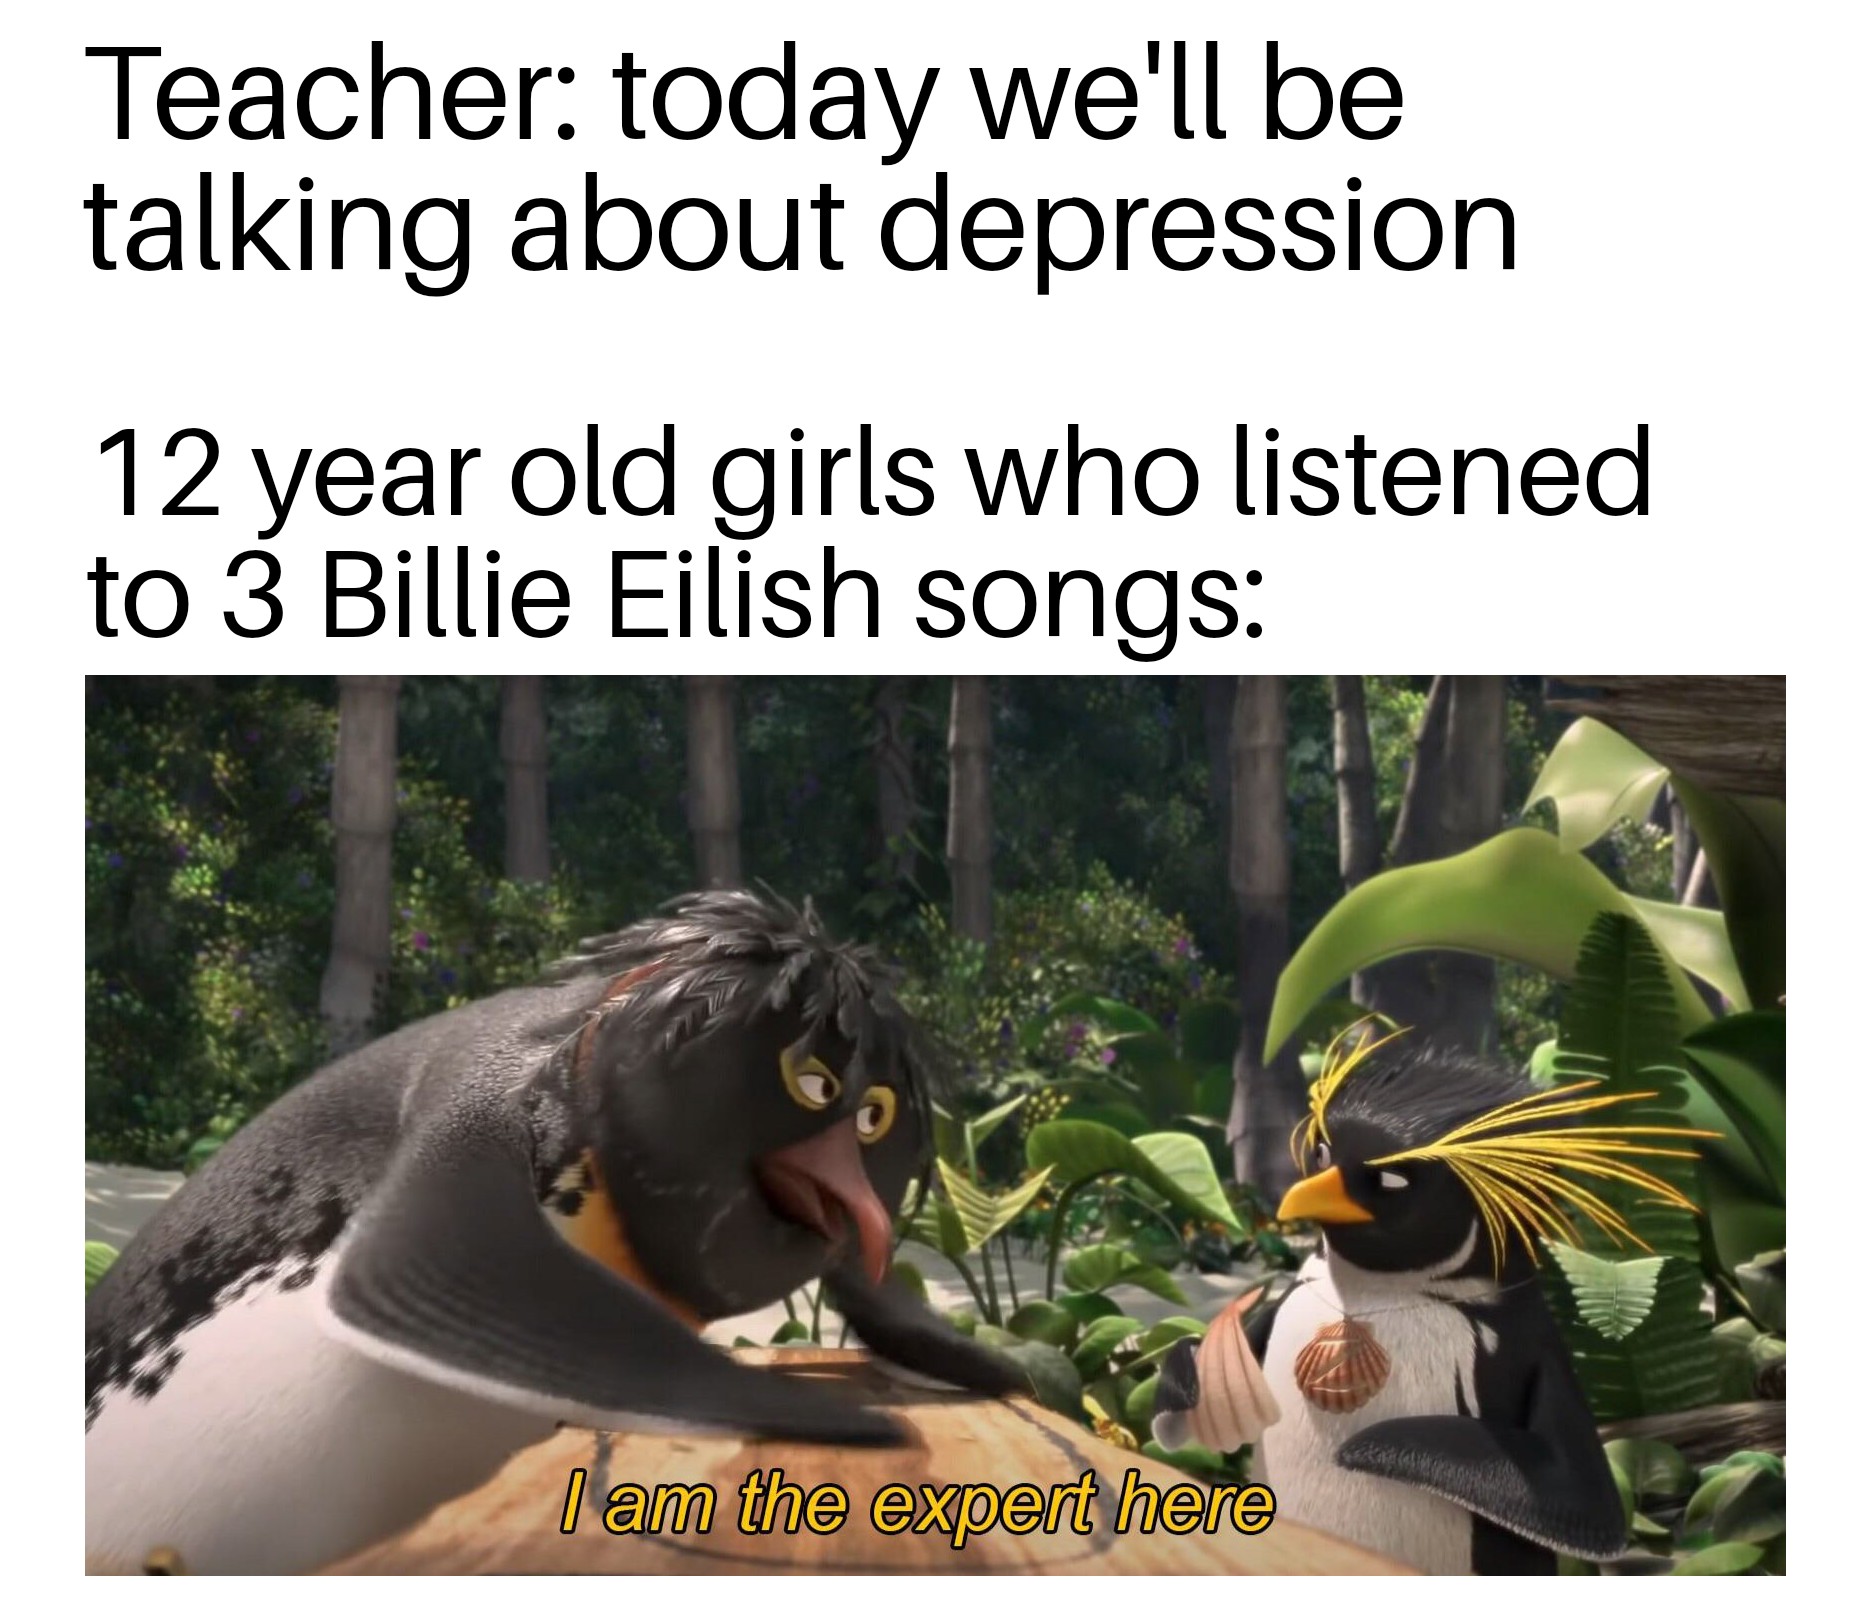 beauchamp college - Teacher today we'll be talking about depression 12 year old girls who listened to 3 Billie Eilish songs I am the expert here